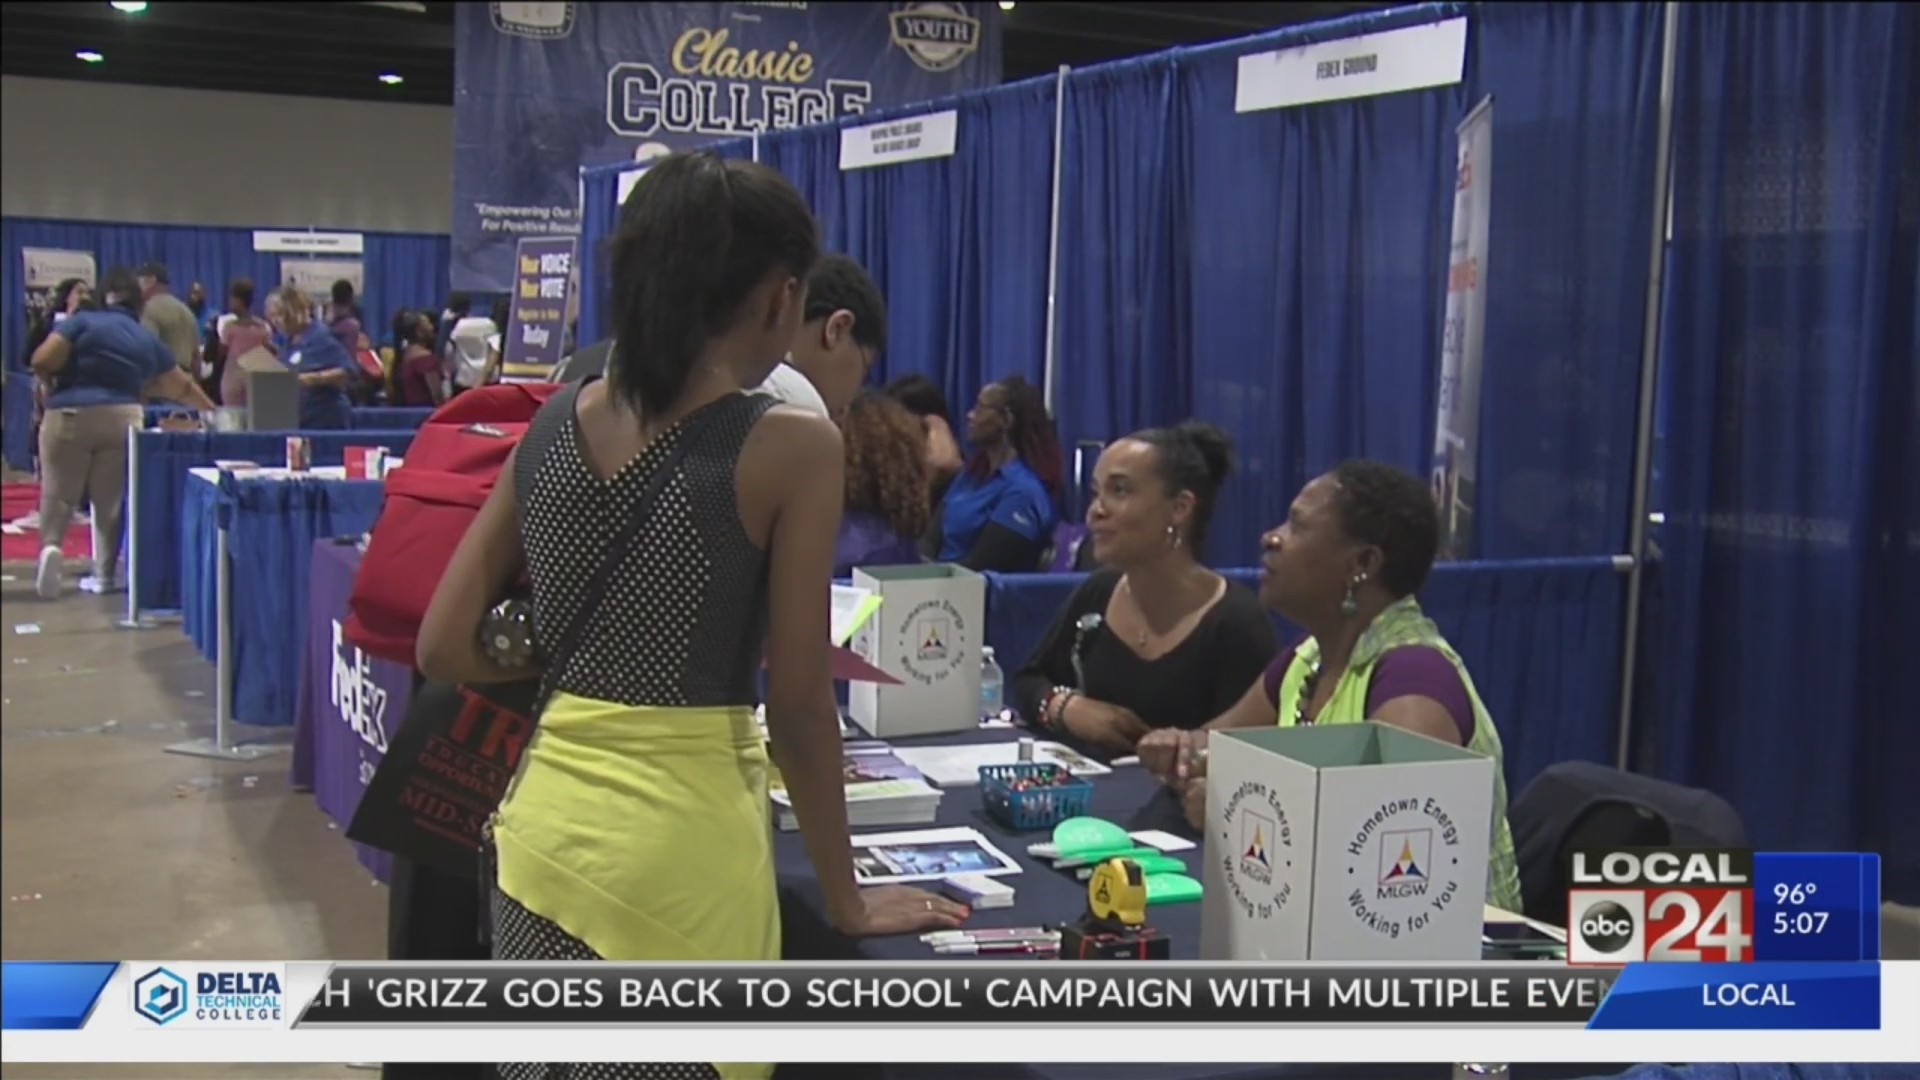 Southern Heritage Classic hosts college & career fair for local students